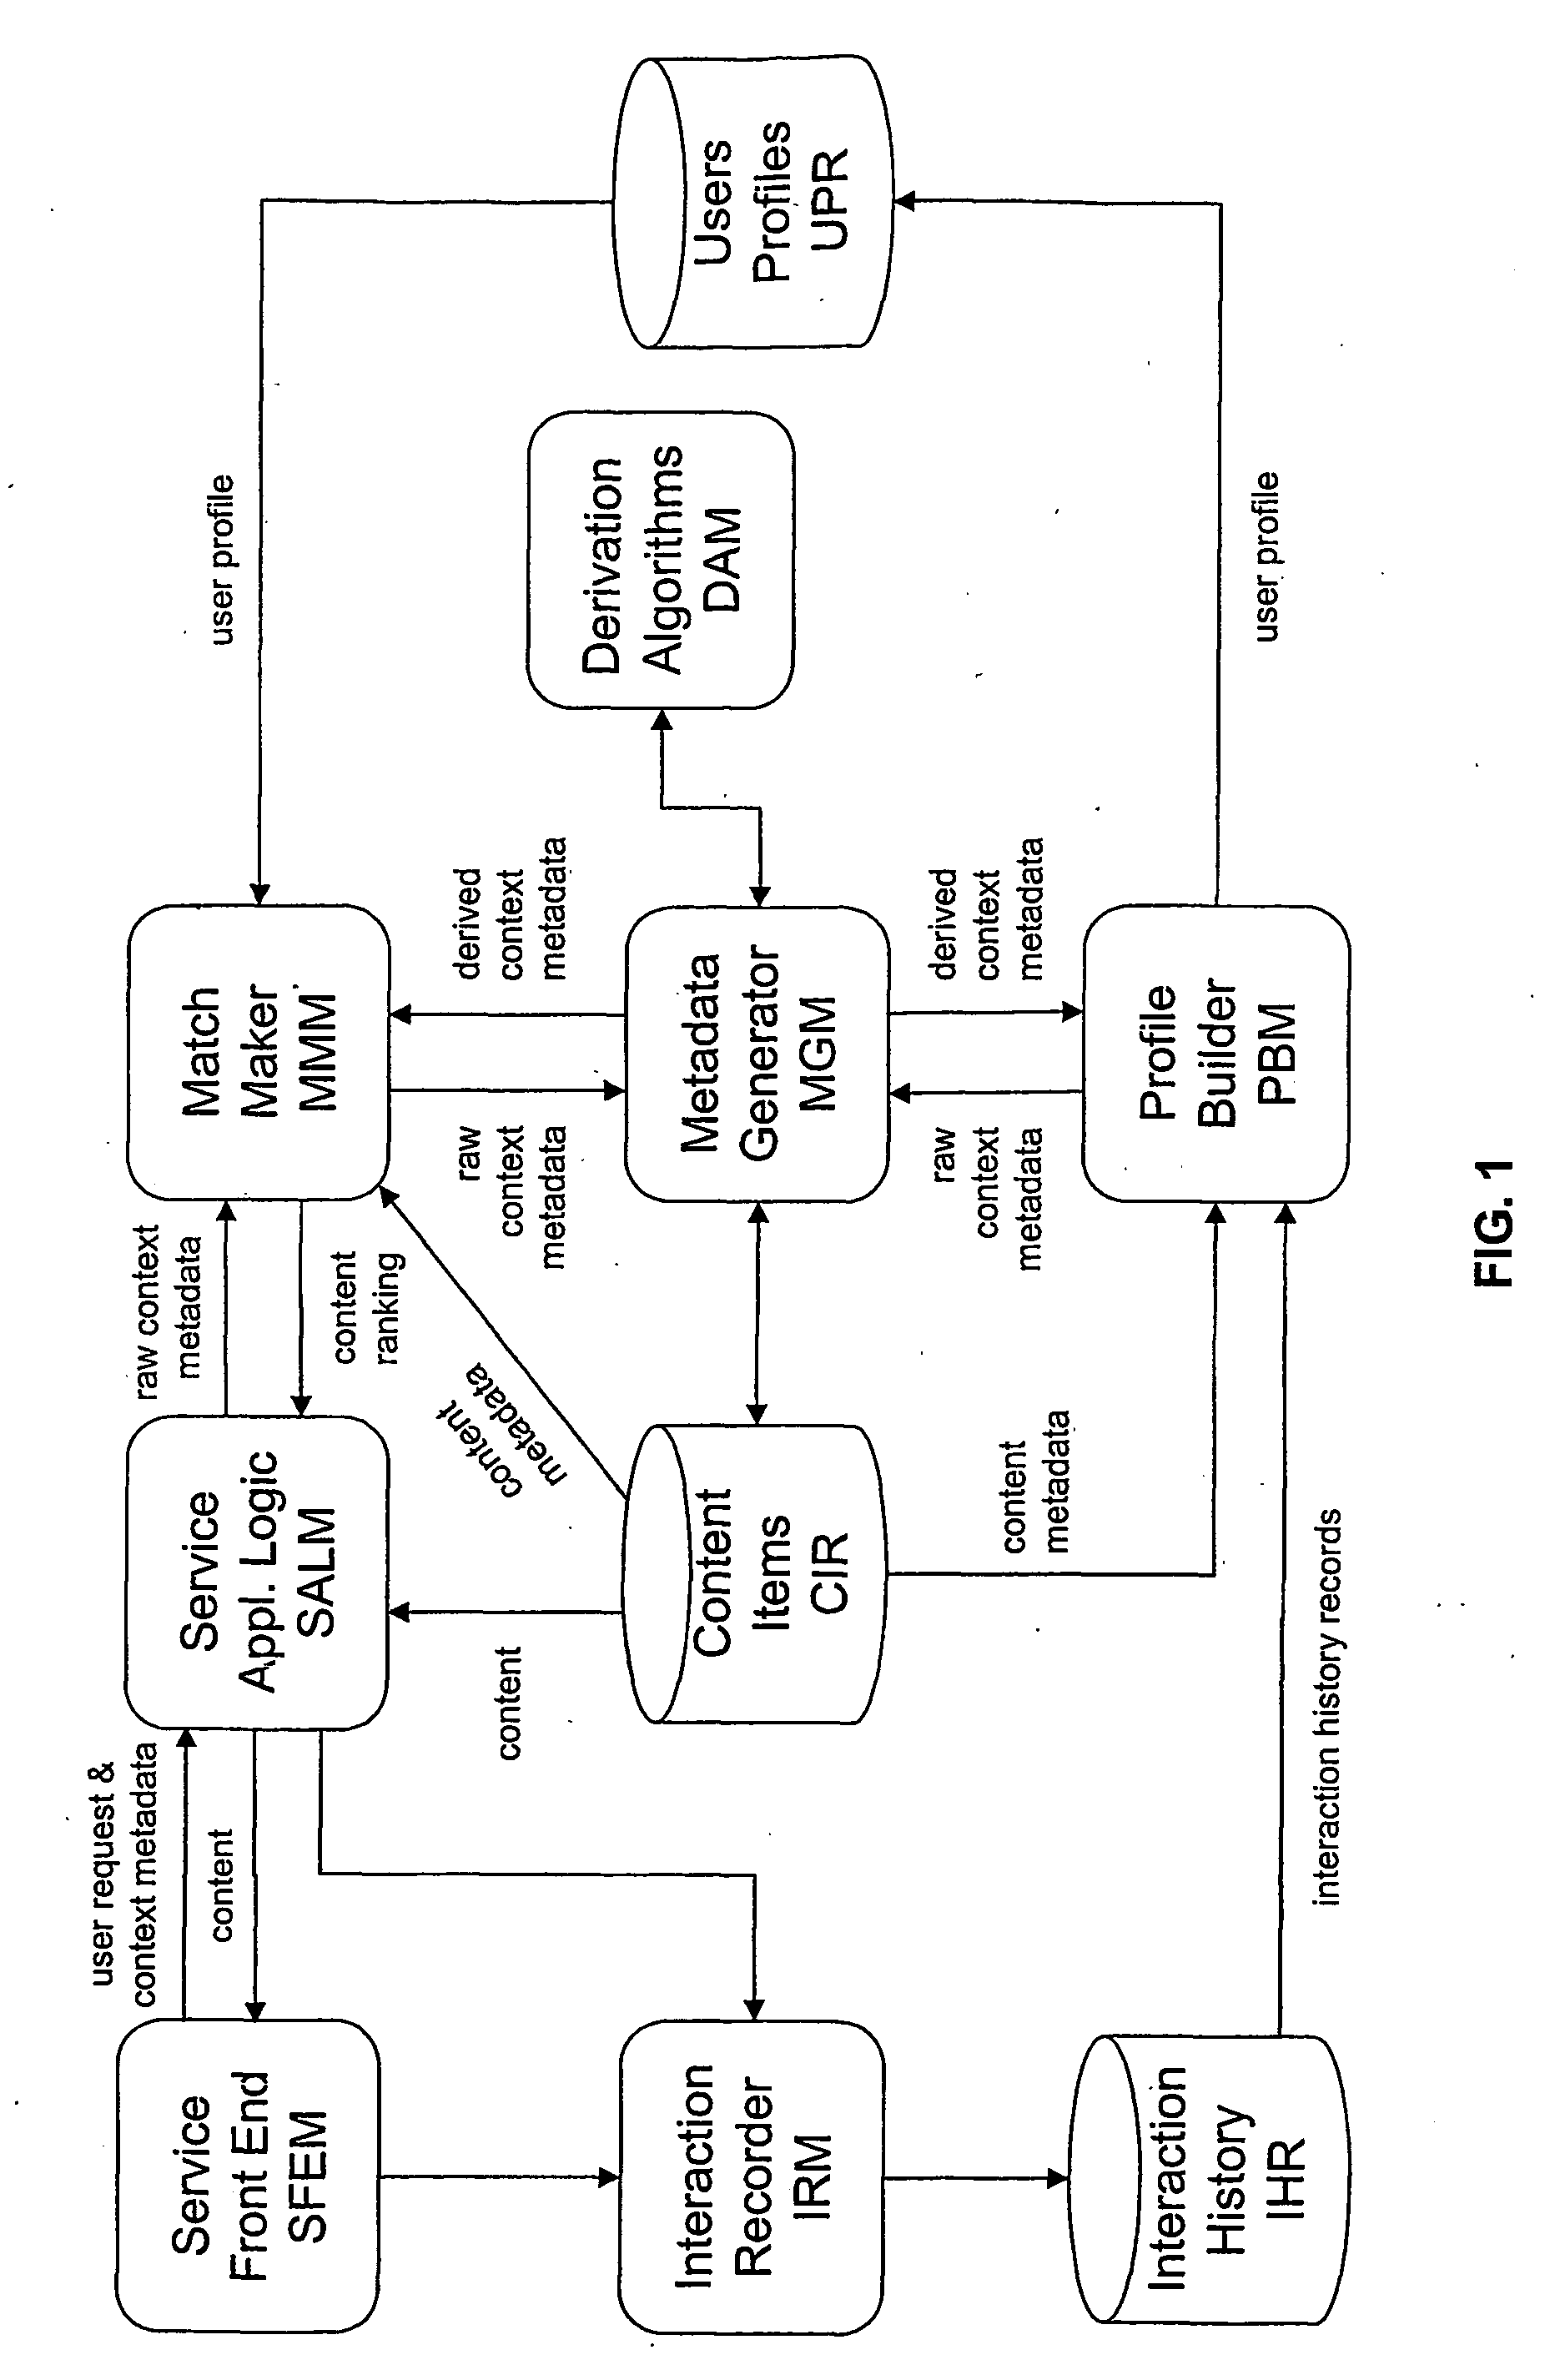 Method of Providing Selected Content Items to a User